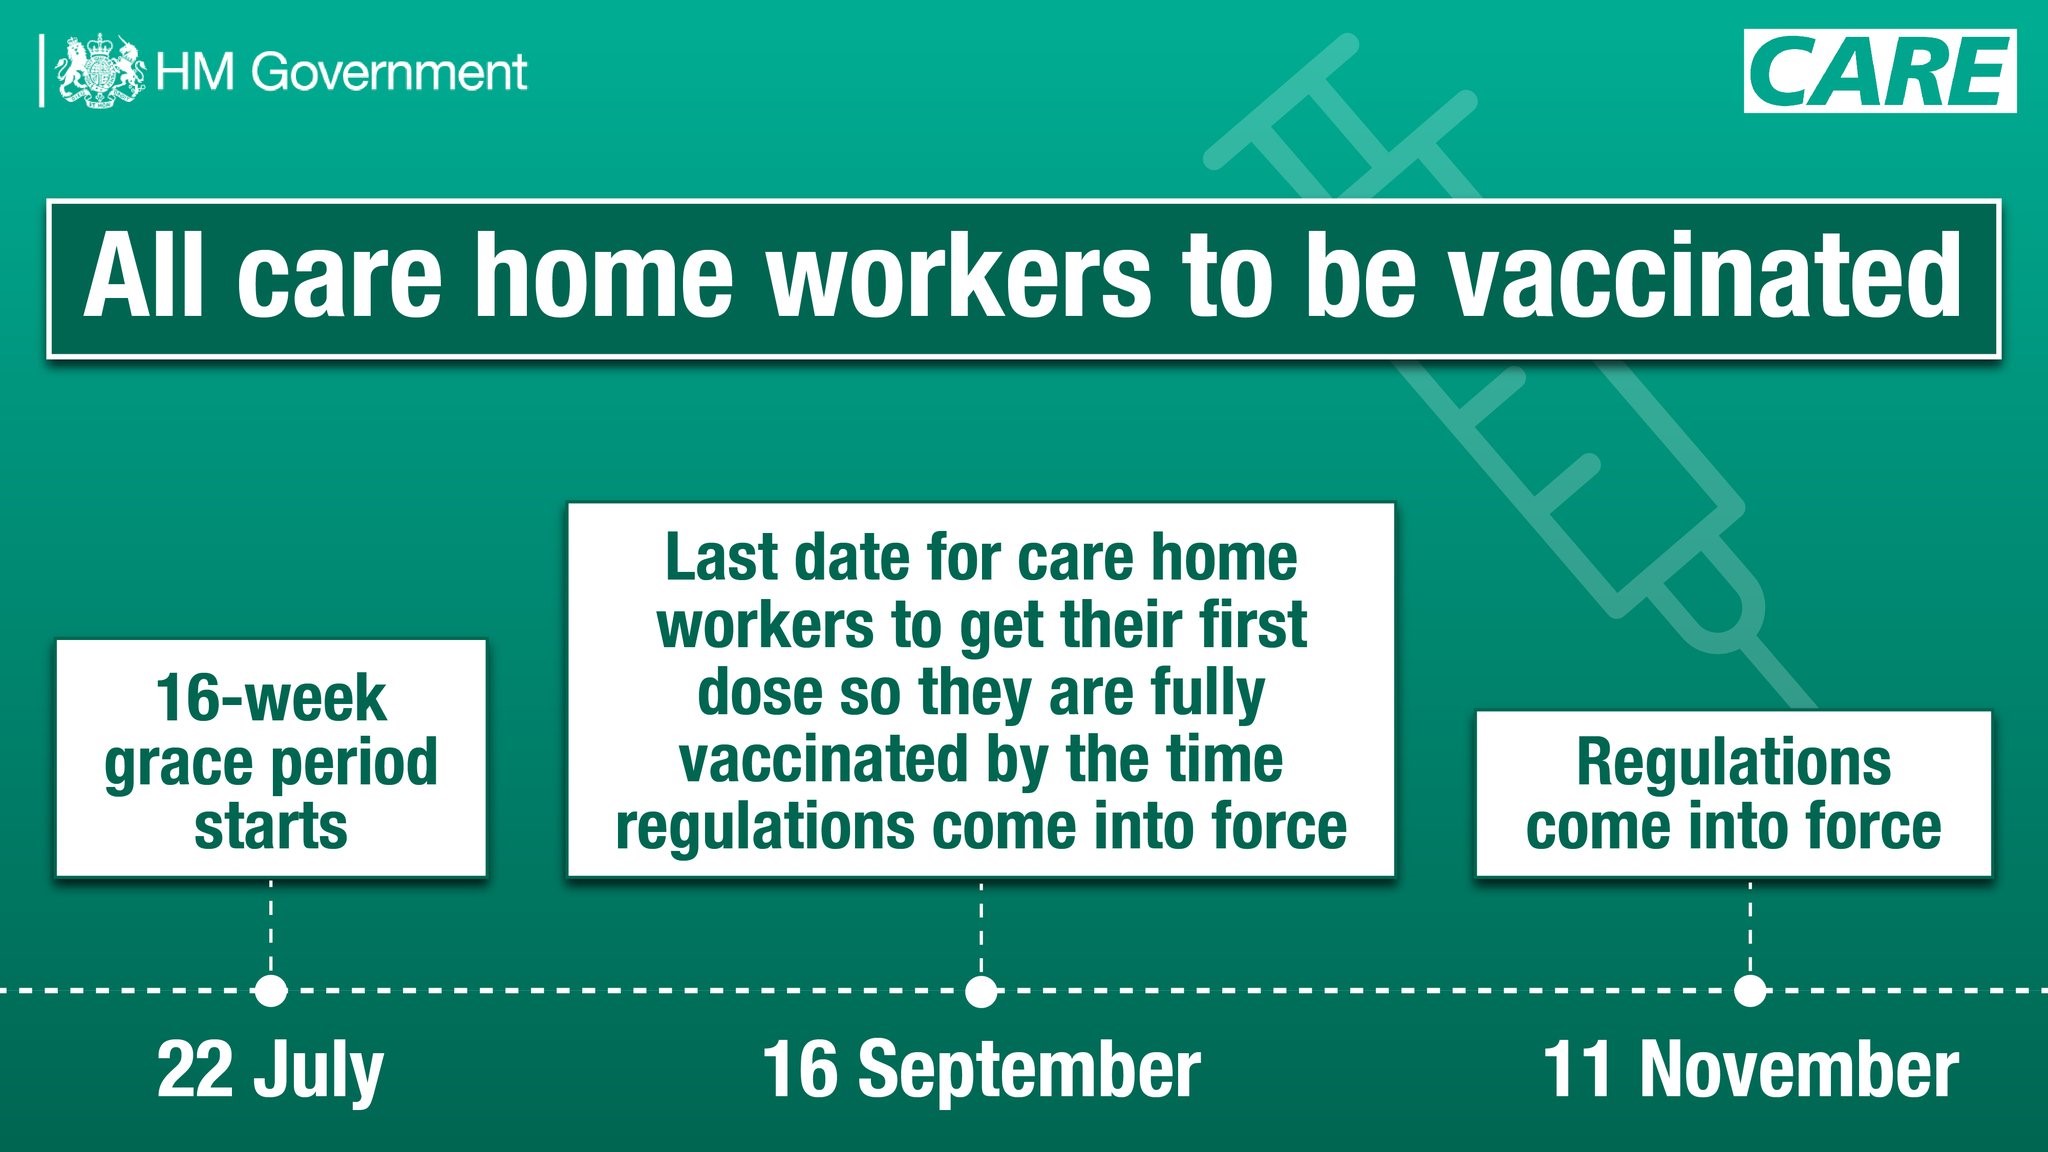 Care Worker Vaccination timeline 16 week grace period started on the 22nd July. This means that the 16th September is the last date care home workers can get their first COVID-19 vaccination dose in order to be fully vaccinated by the time the regulations come into force on 11th November. 